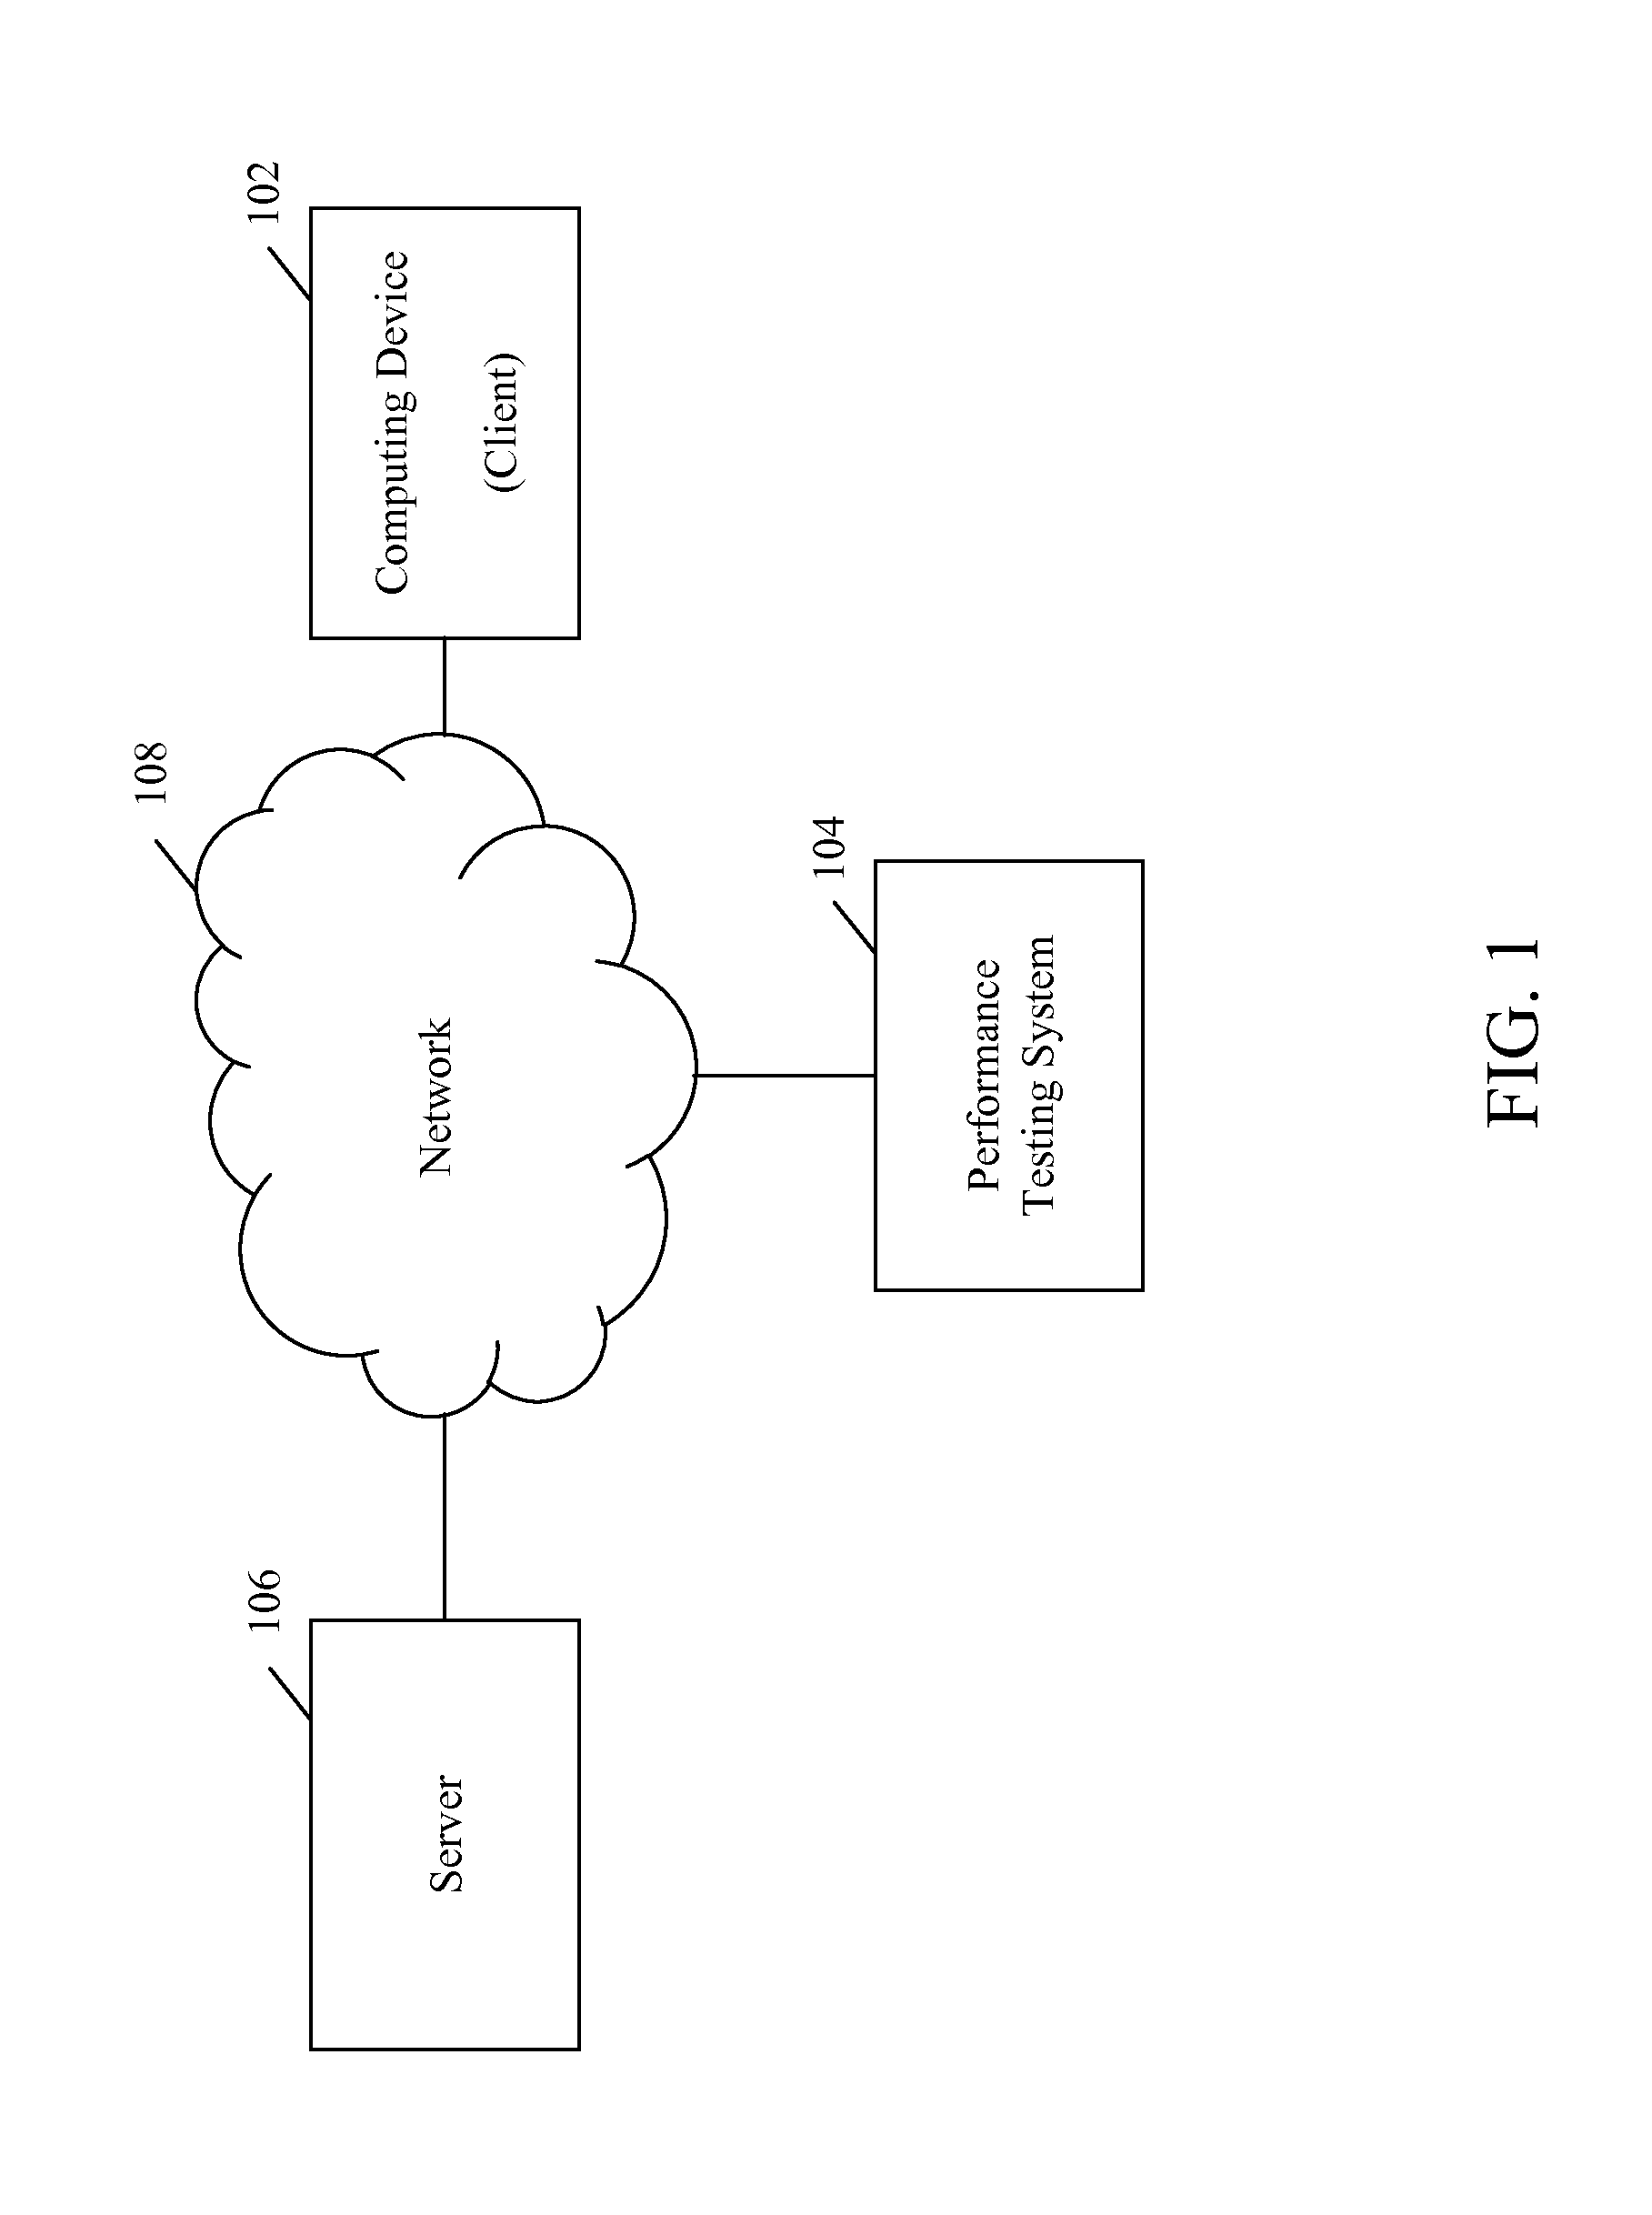 System and method for testing performance of mobile application server